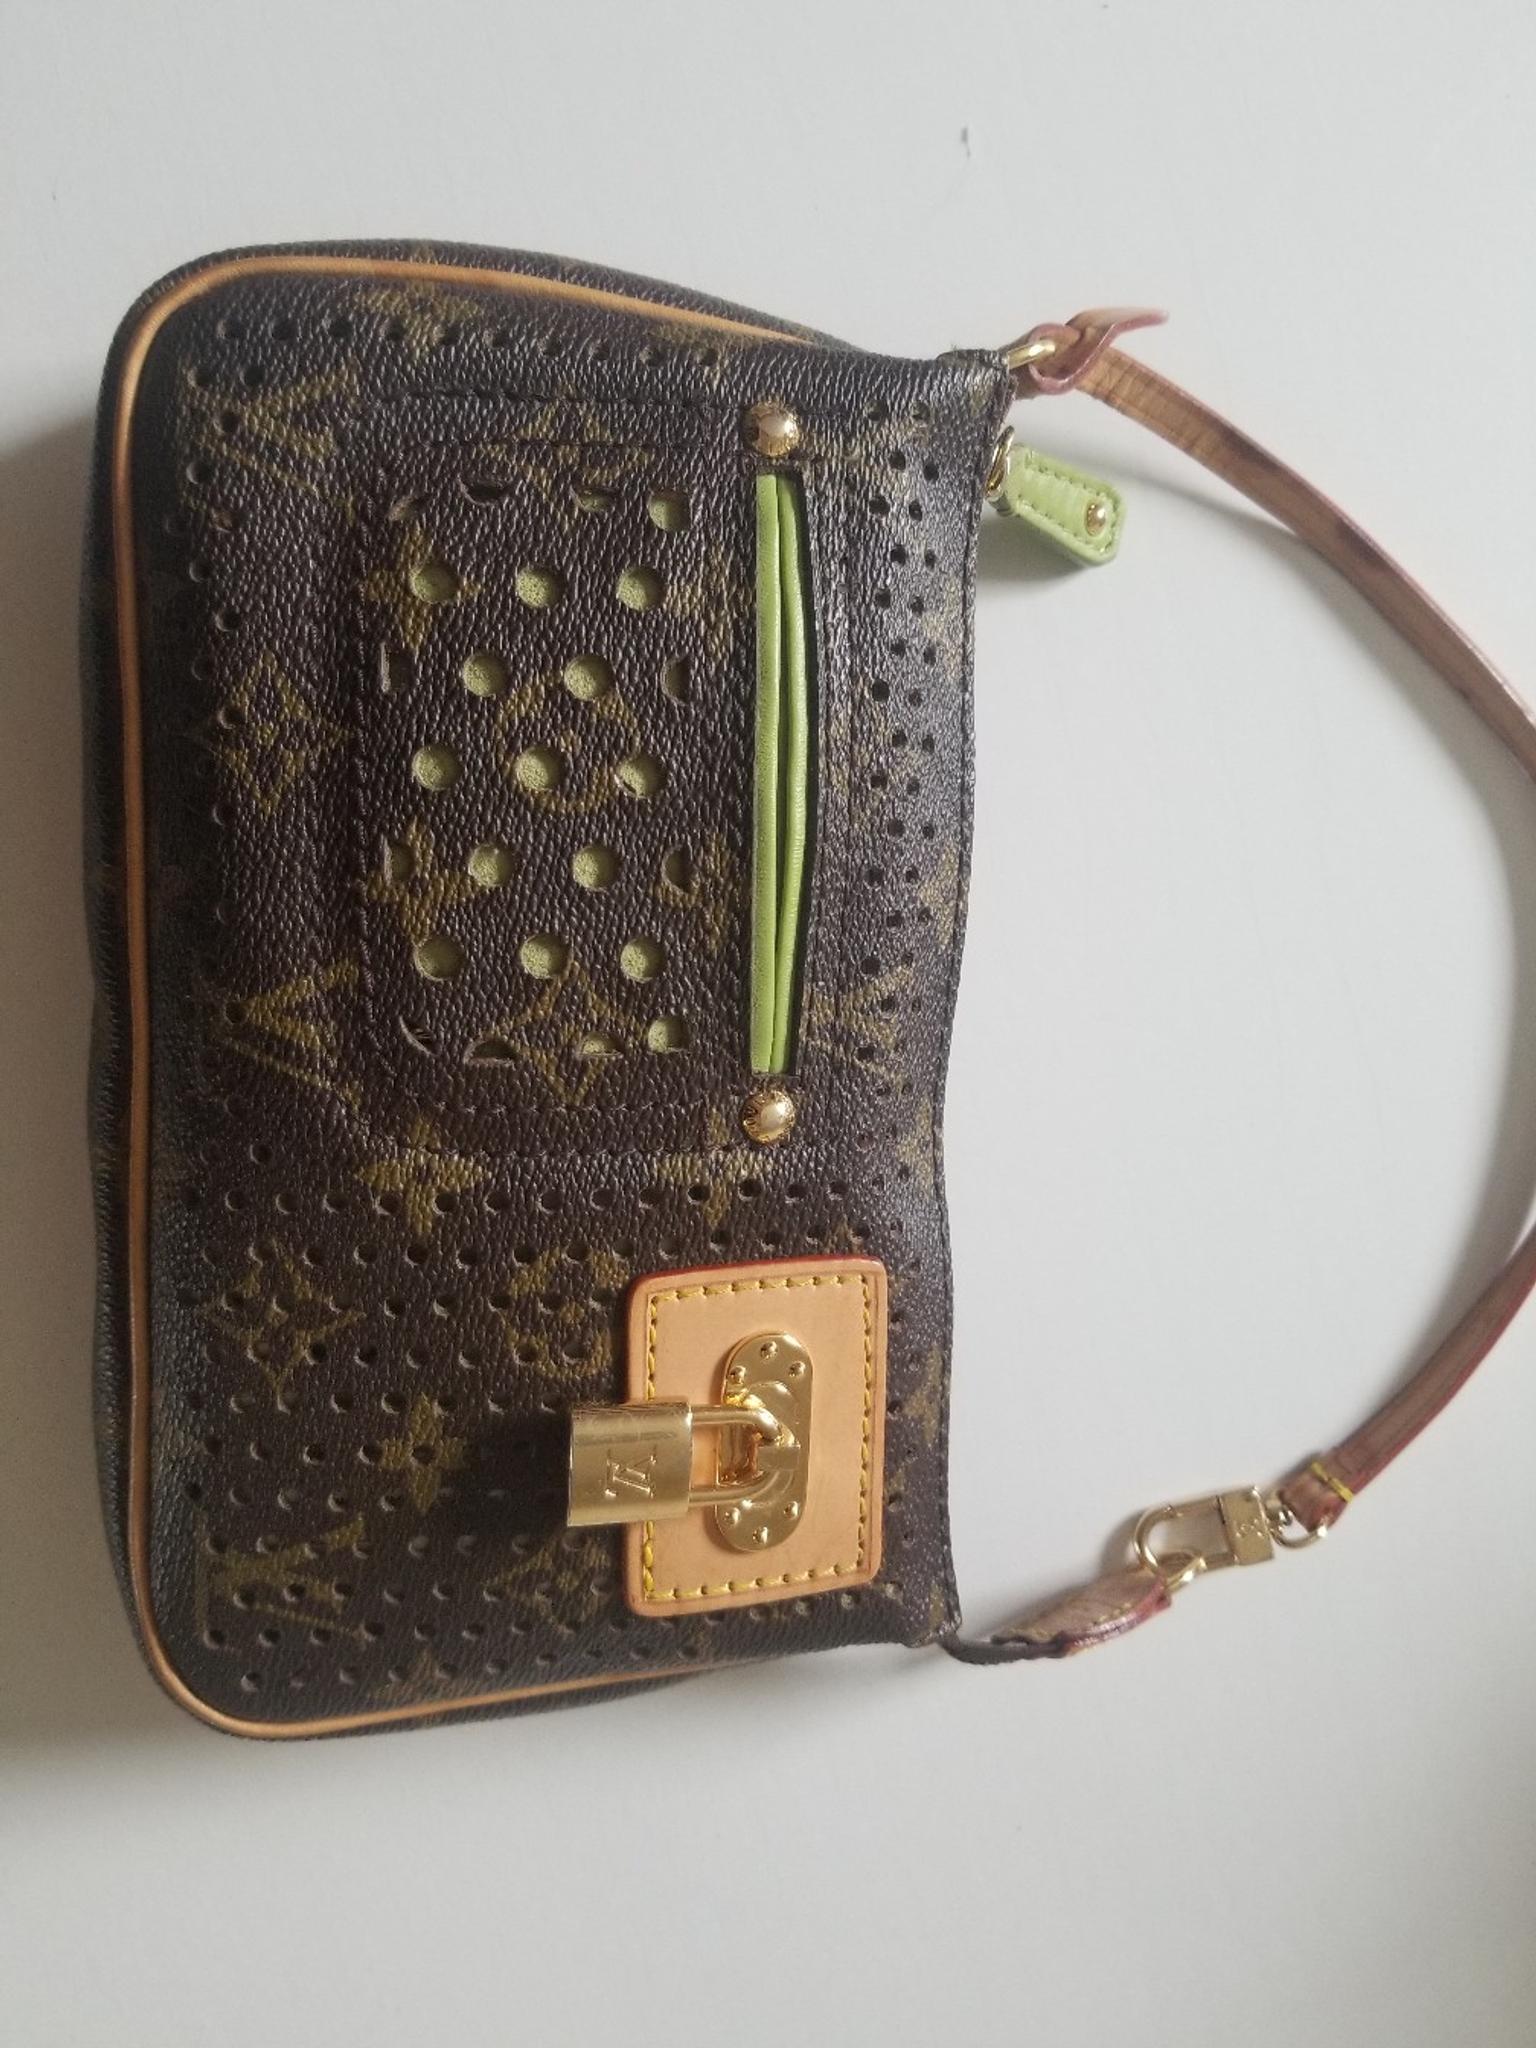 Louis Vuitton Pochette 10 years old in Scunthorpe for £700.00 for sale | Shpock